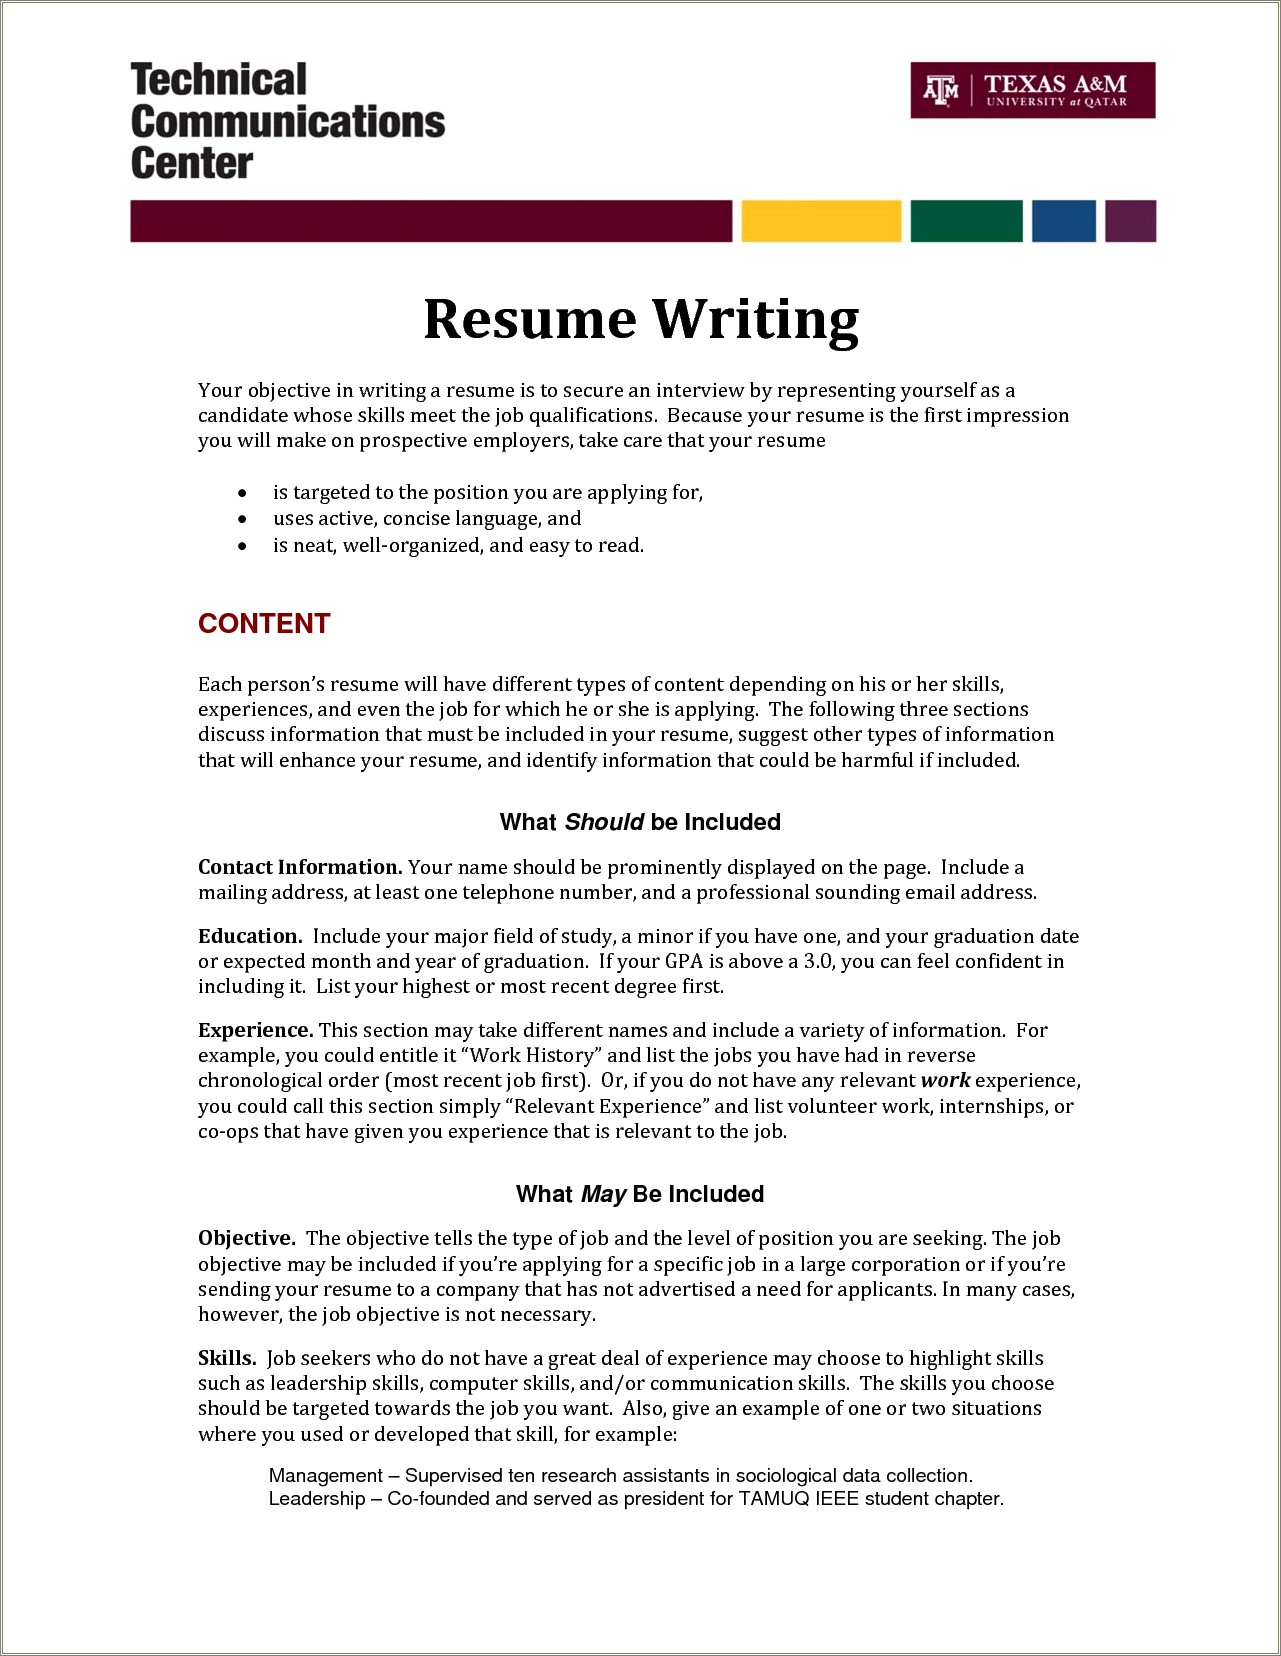 Where To Put Internships In Your Resume